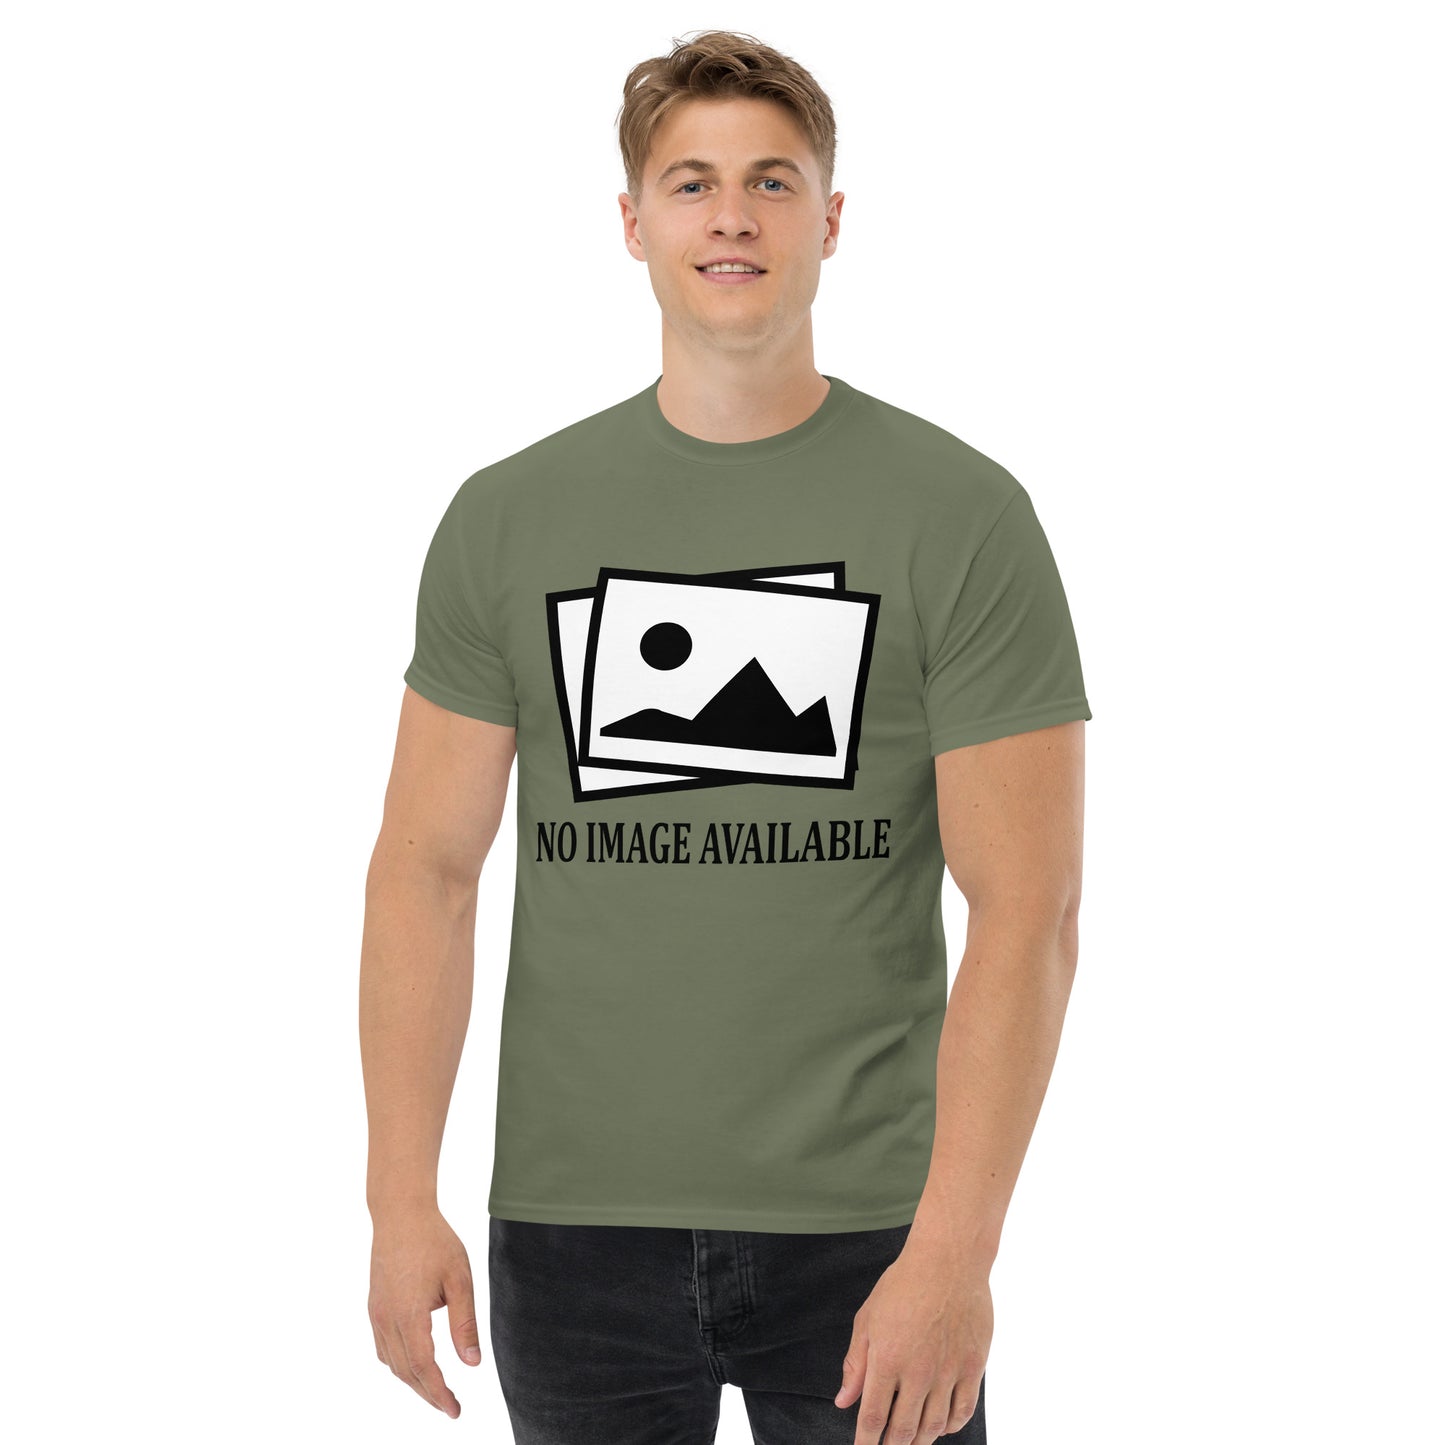 Men with military green t-shirt with image and text "no image available"